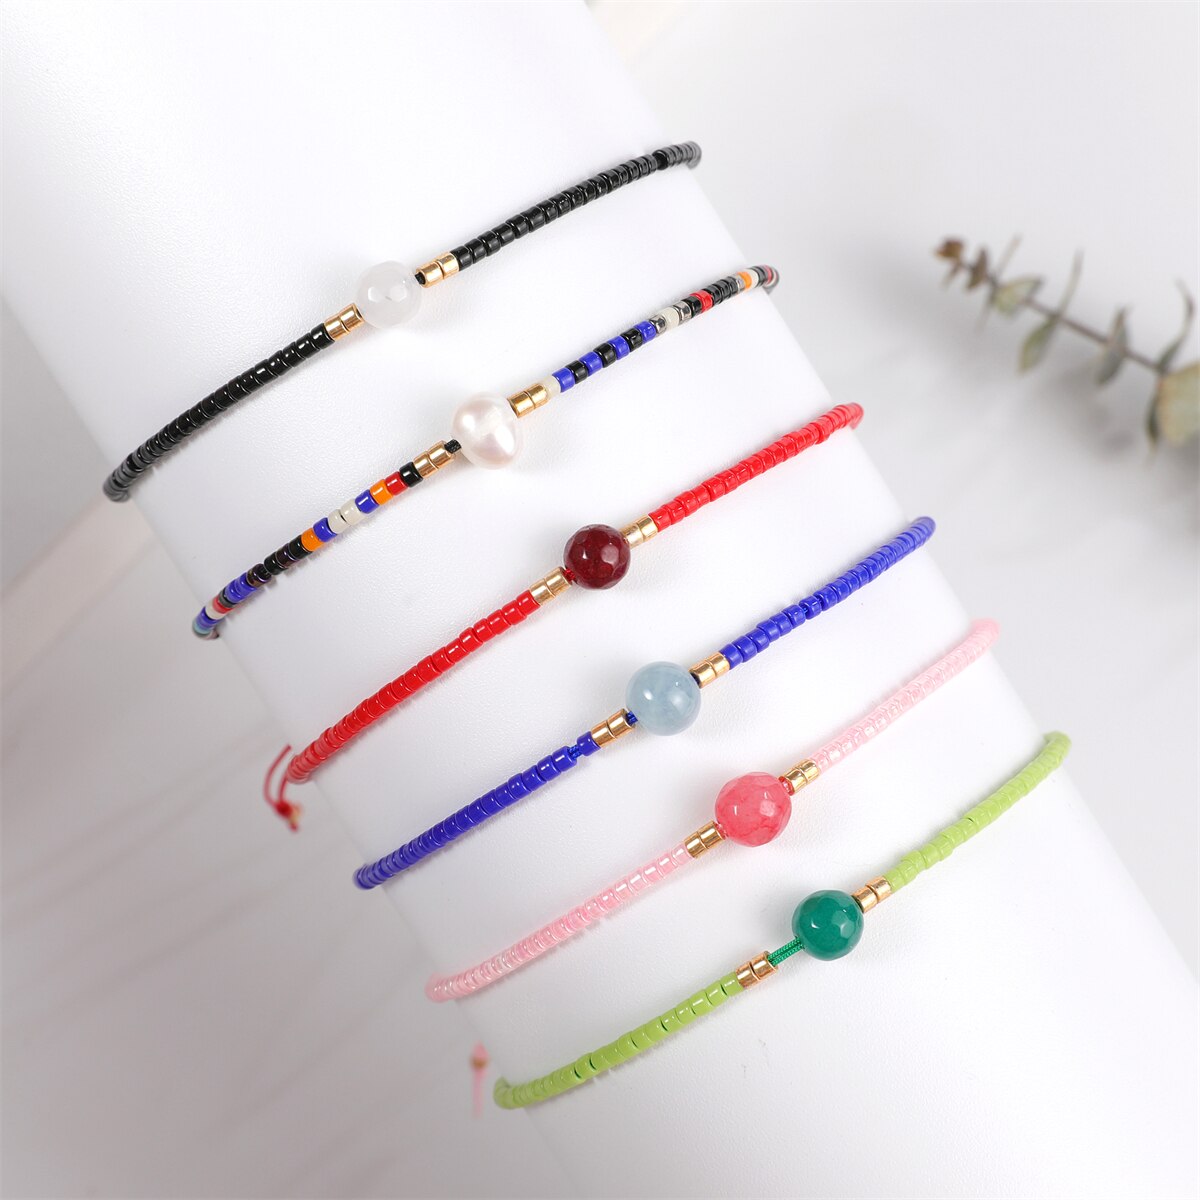 1pc Natural Stone Beads Pendant Charm Braided Bracelets for Women Girls Handmade Adjustable Chain Party Jewelry